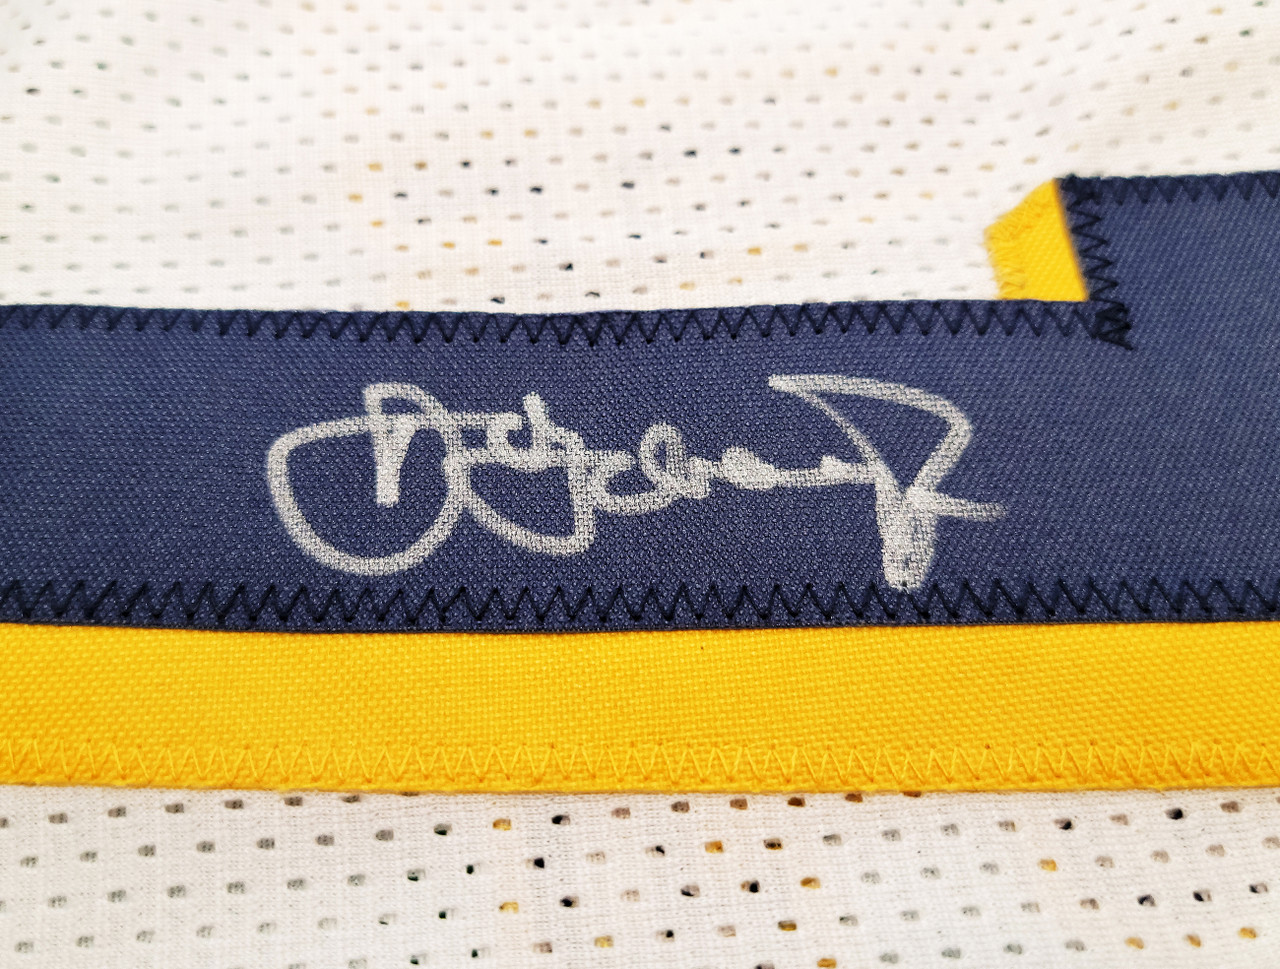 1991-92 Detlef Schrempf Vintage Signed Indiana Pacers Jersey., Lot  #44294